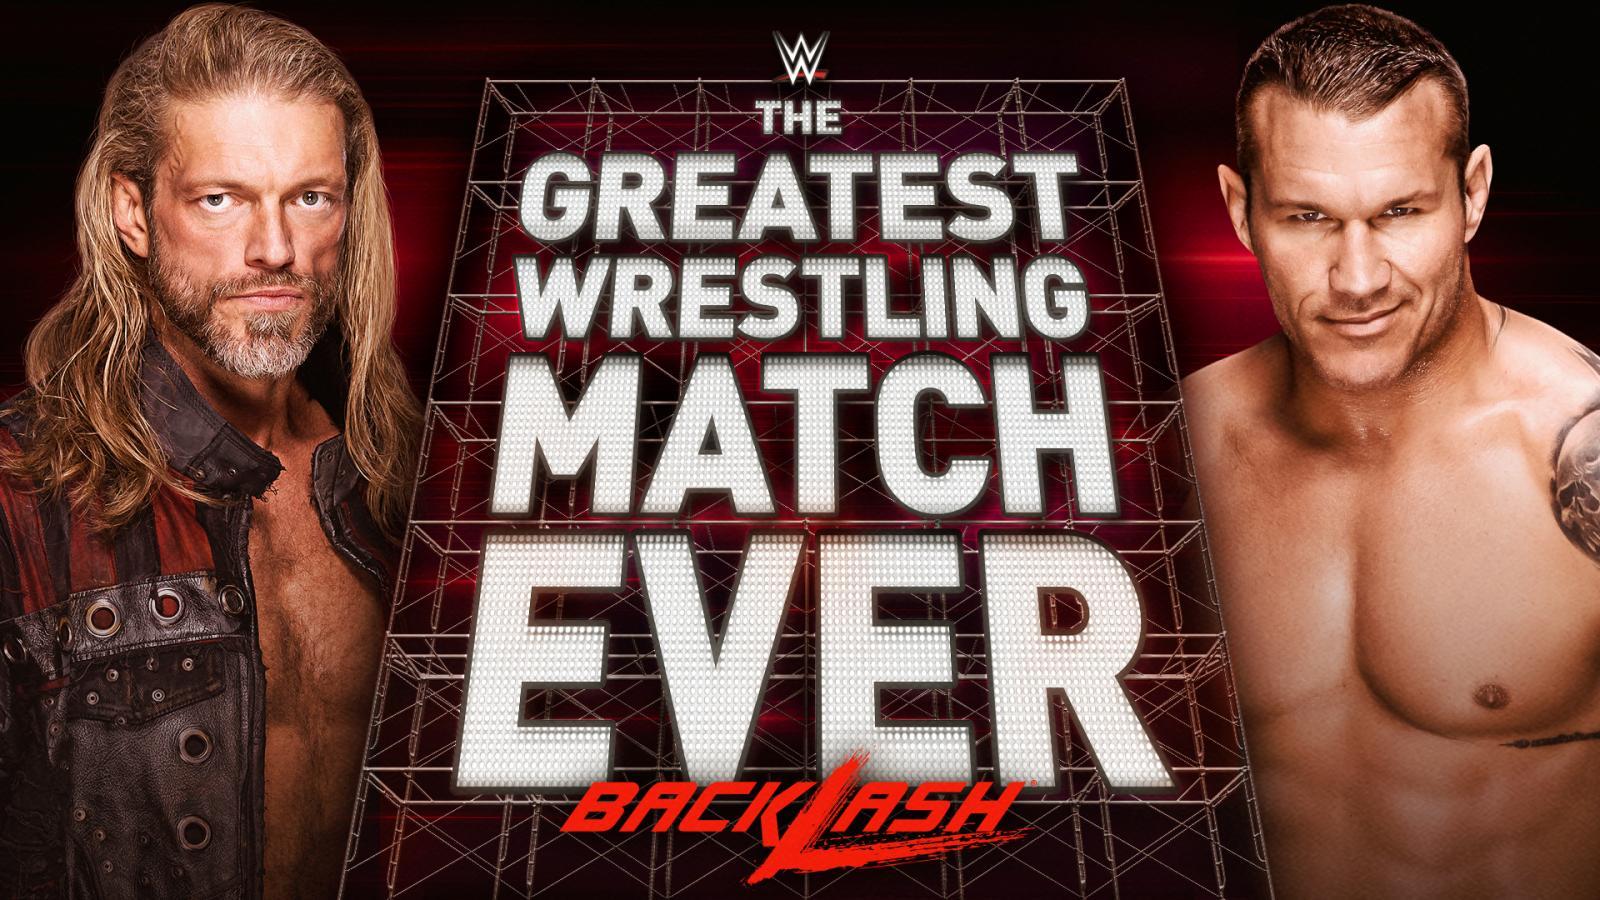 WWE legends Edge and Randy Orton to have rematch at Backlash PPV in 'greatest wrestling match ever'